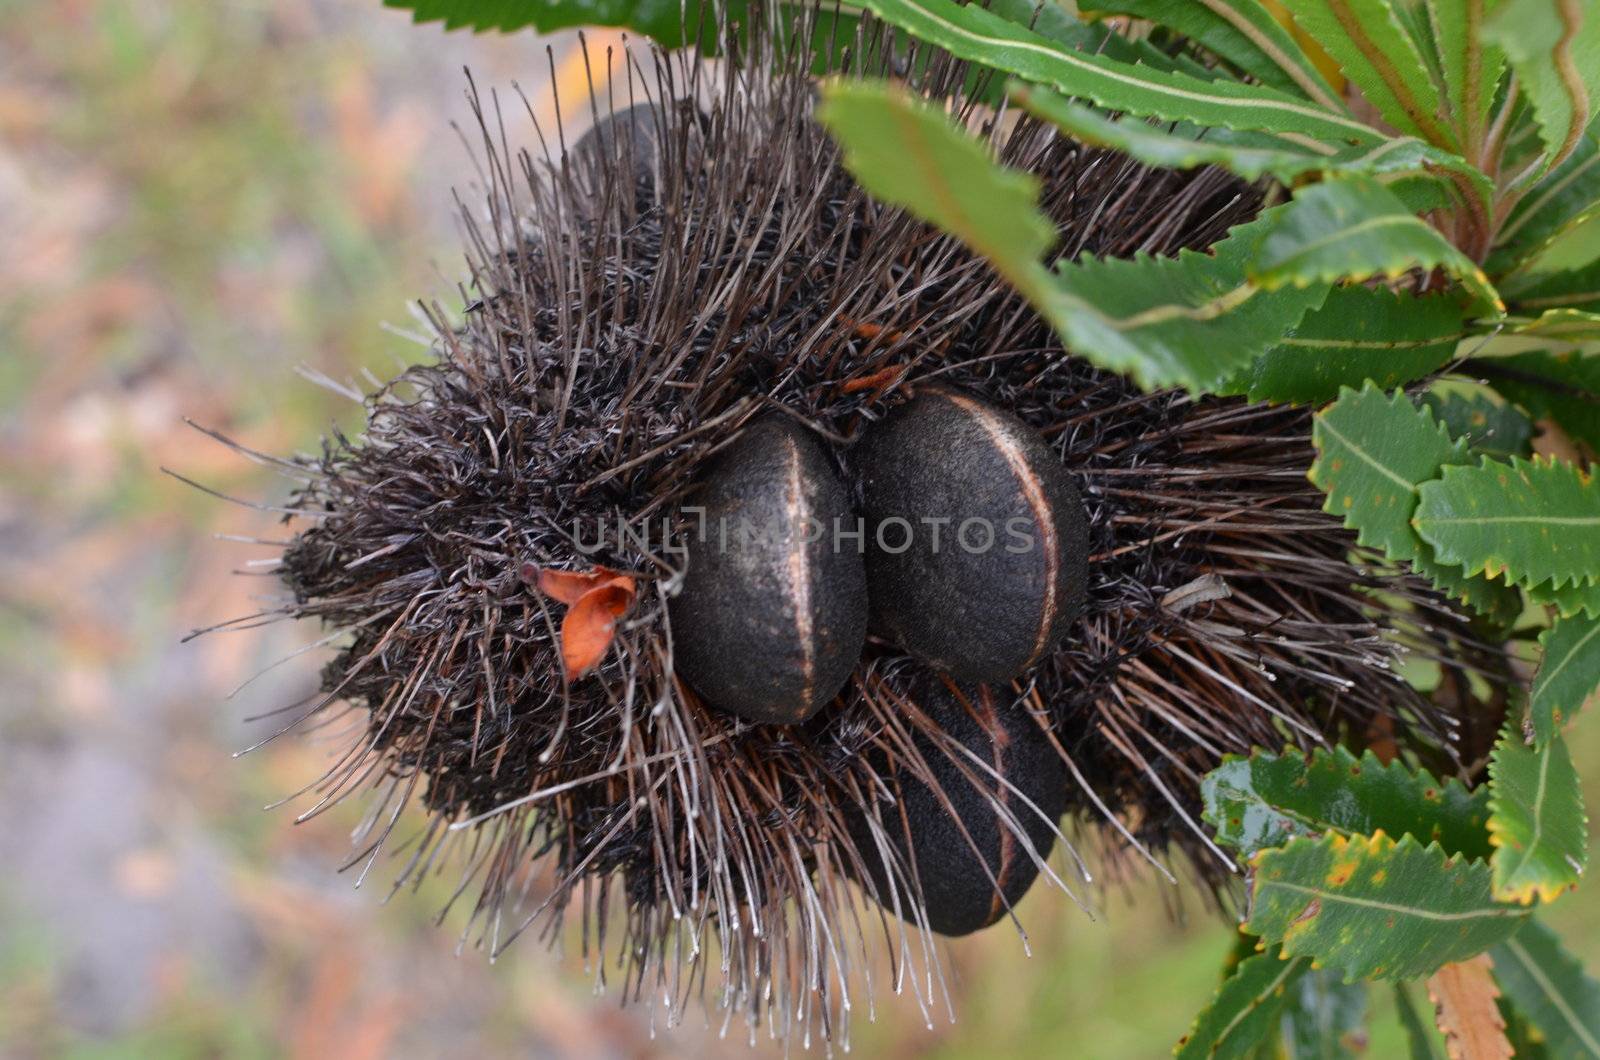 Seed capsules of a Banksia Integrifolia tree. Those familiar with May Gibb's children's book "Snugglepot and Cuddlepie" will know of the "big, bad, banksia men".